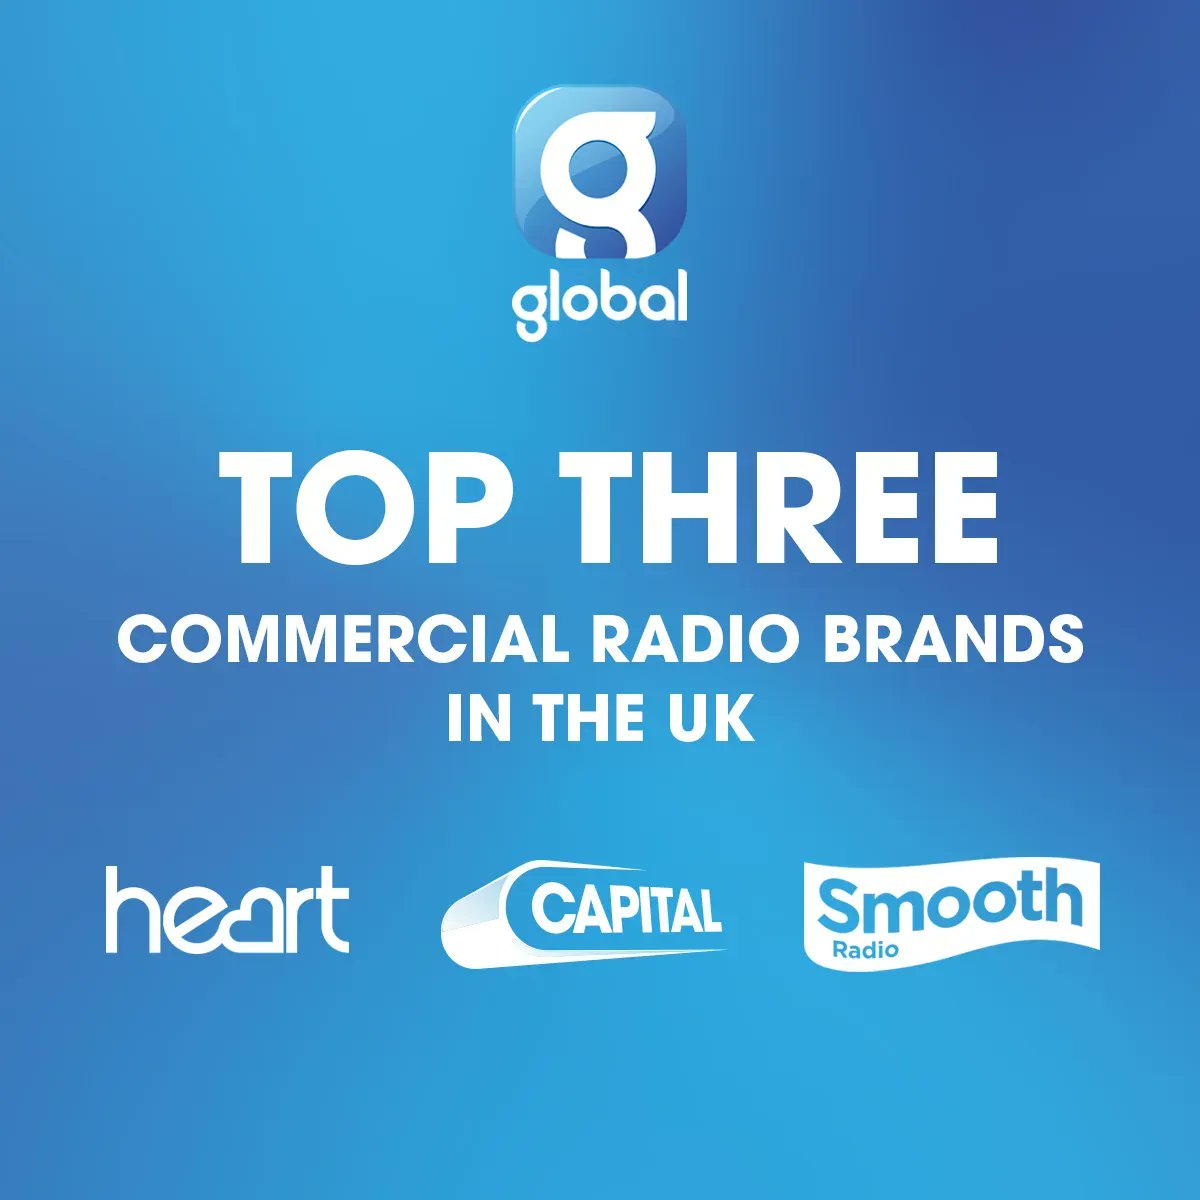 We're celebrating the news that @thisisheart, @CapitalOfficial and @SmoothRadio are the top three commercial radio brands in the UK! ❤️💙💜 #RAJAR Listen to your favourite stations on @GlobalPlayer 📲